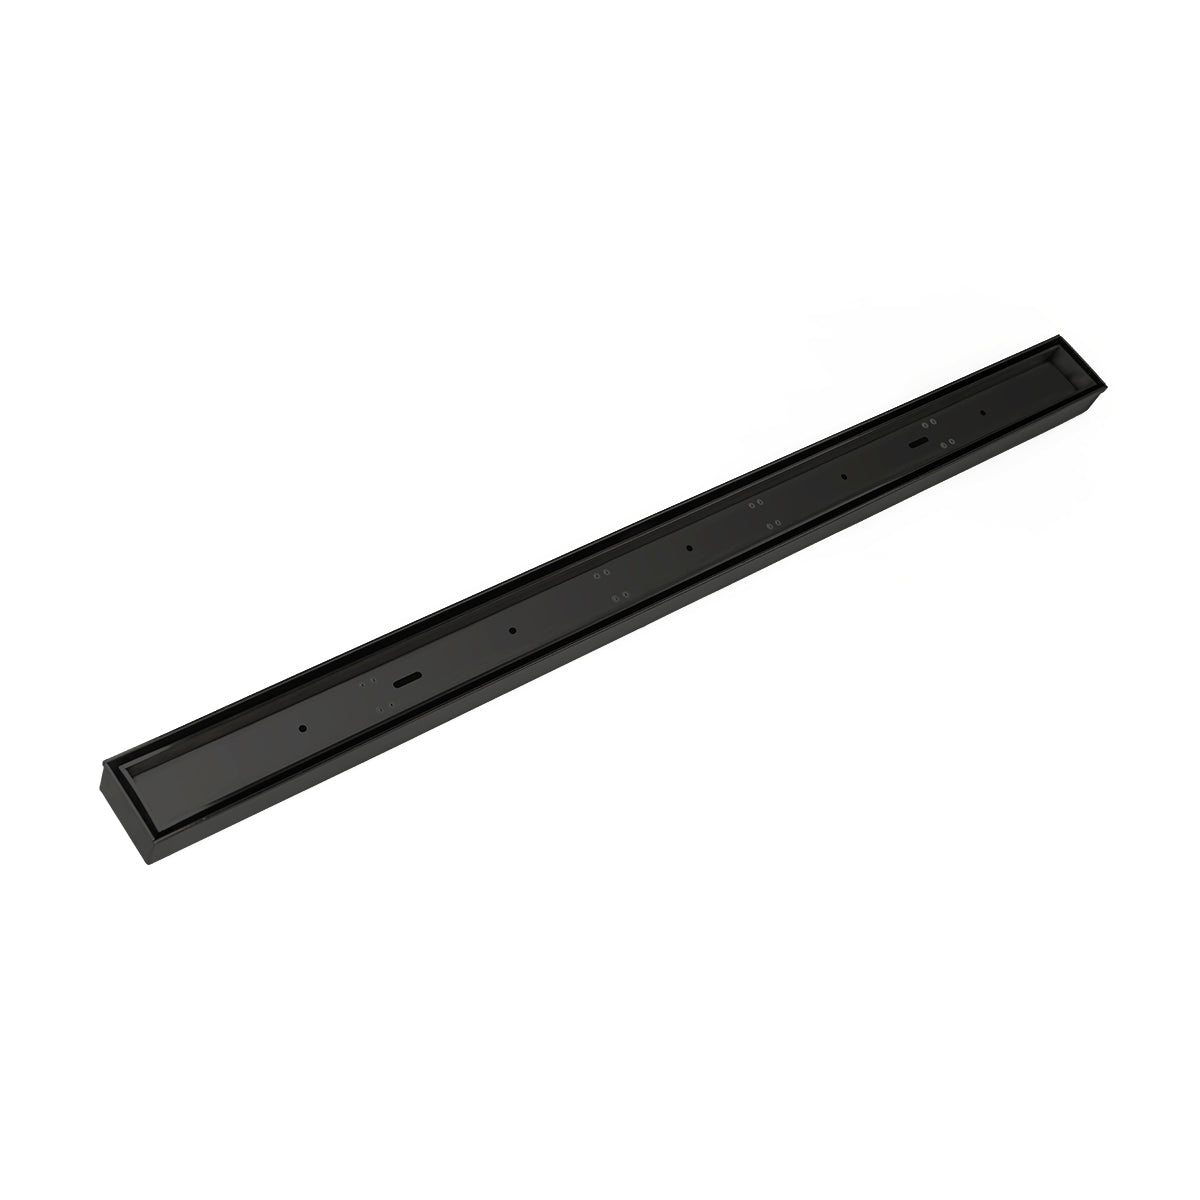 Infinity Drain 42" FX Low Profile Series Fixed Length Linear Drain Kit with Tile Insert Frame